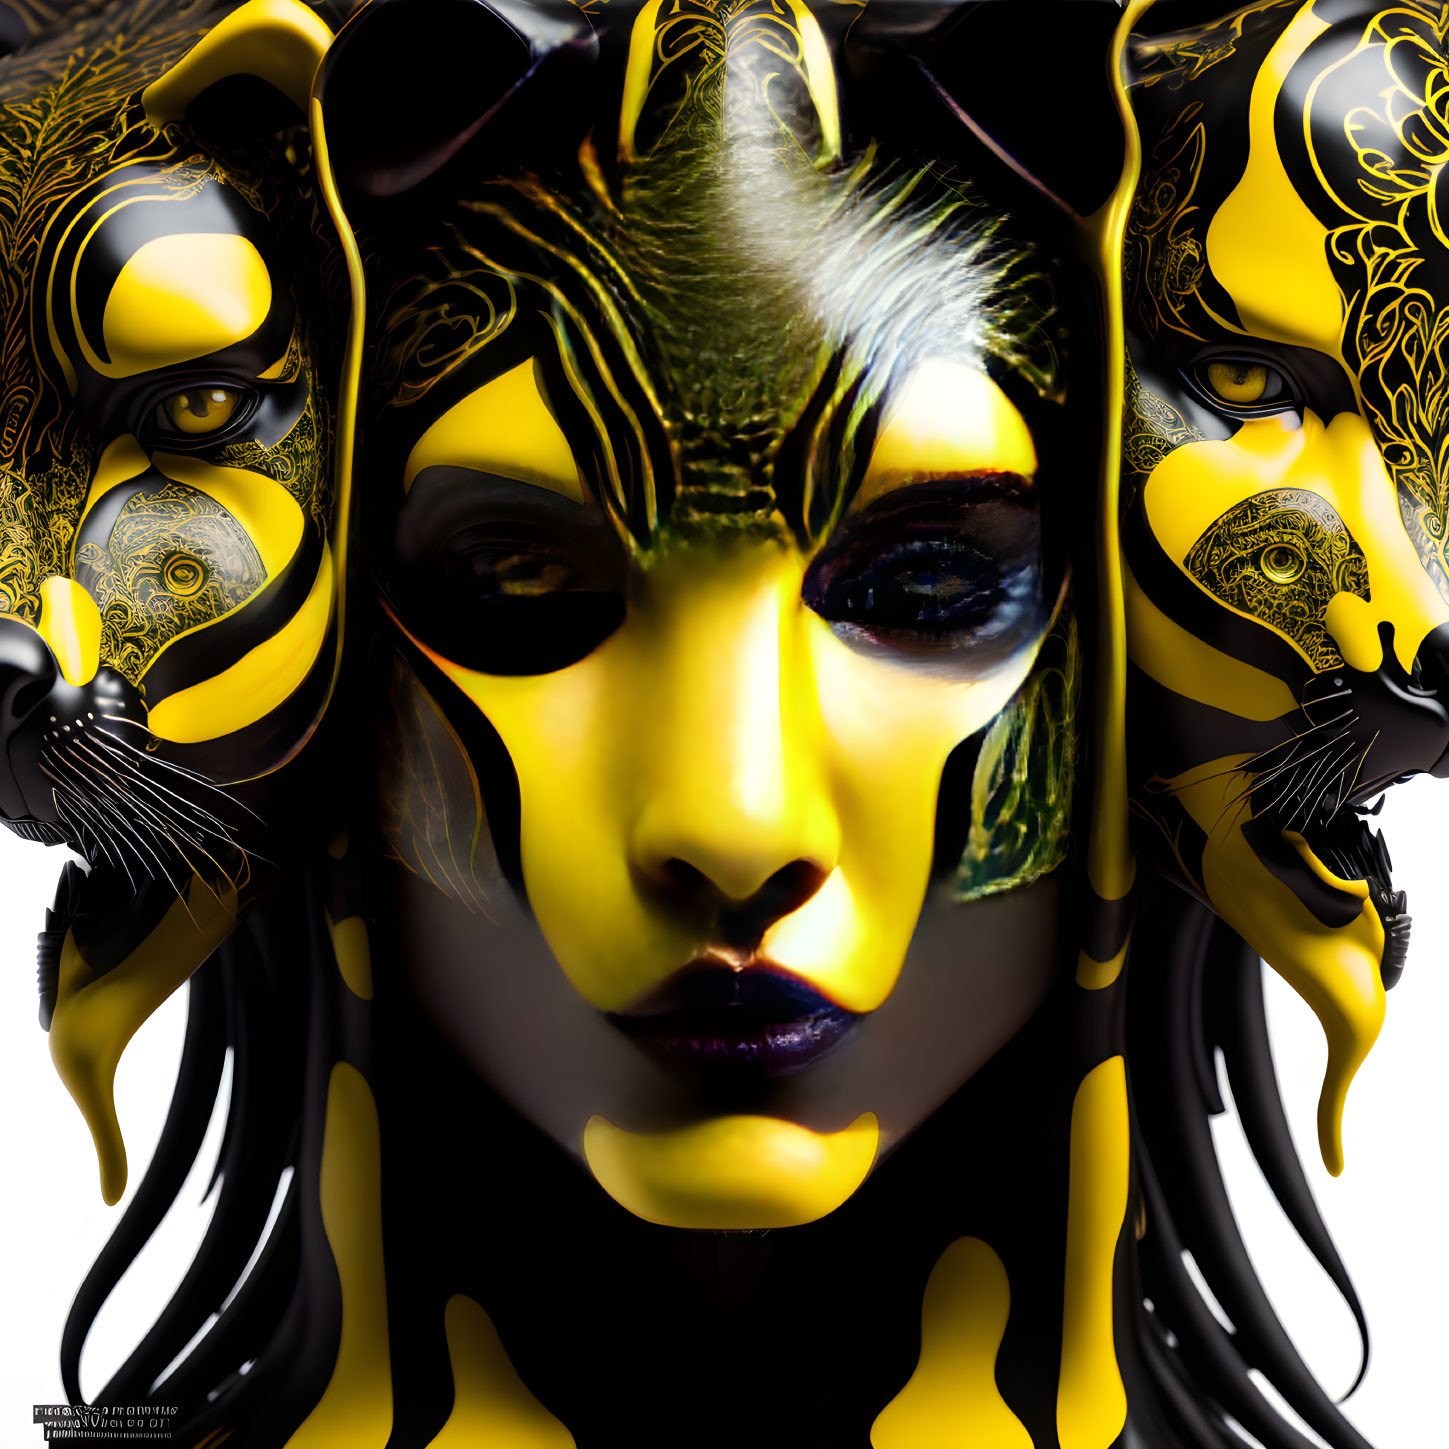 Surreal artwork with central face flanked by golden lion faces